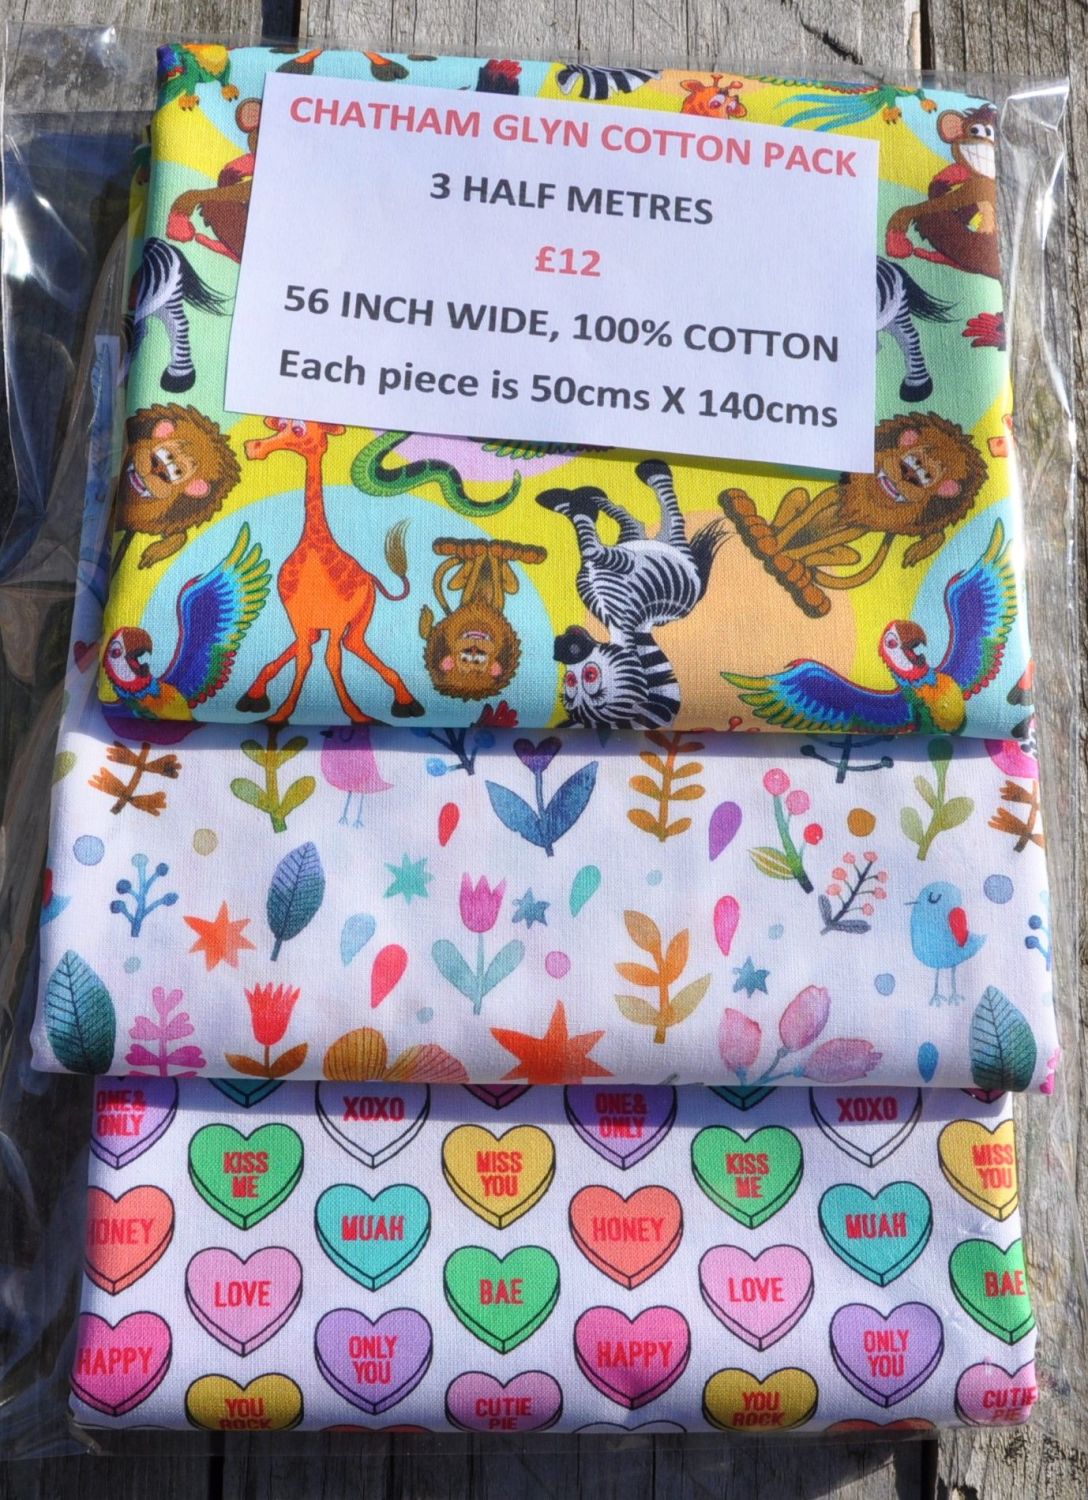 3 half metre pack by Chatham Glyn. 100% cotton. PACK TEN.